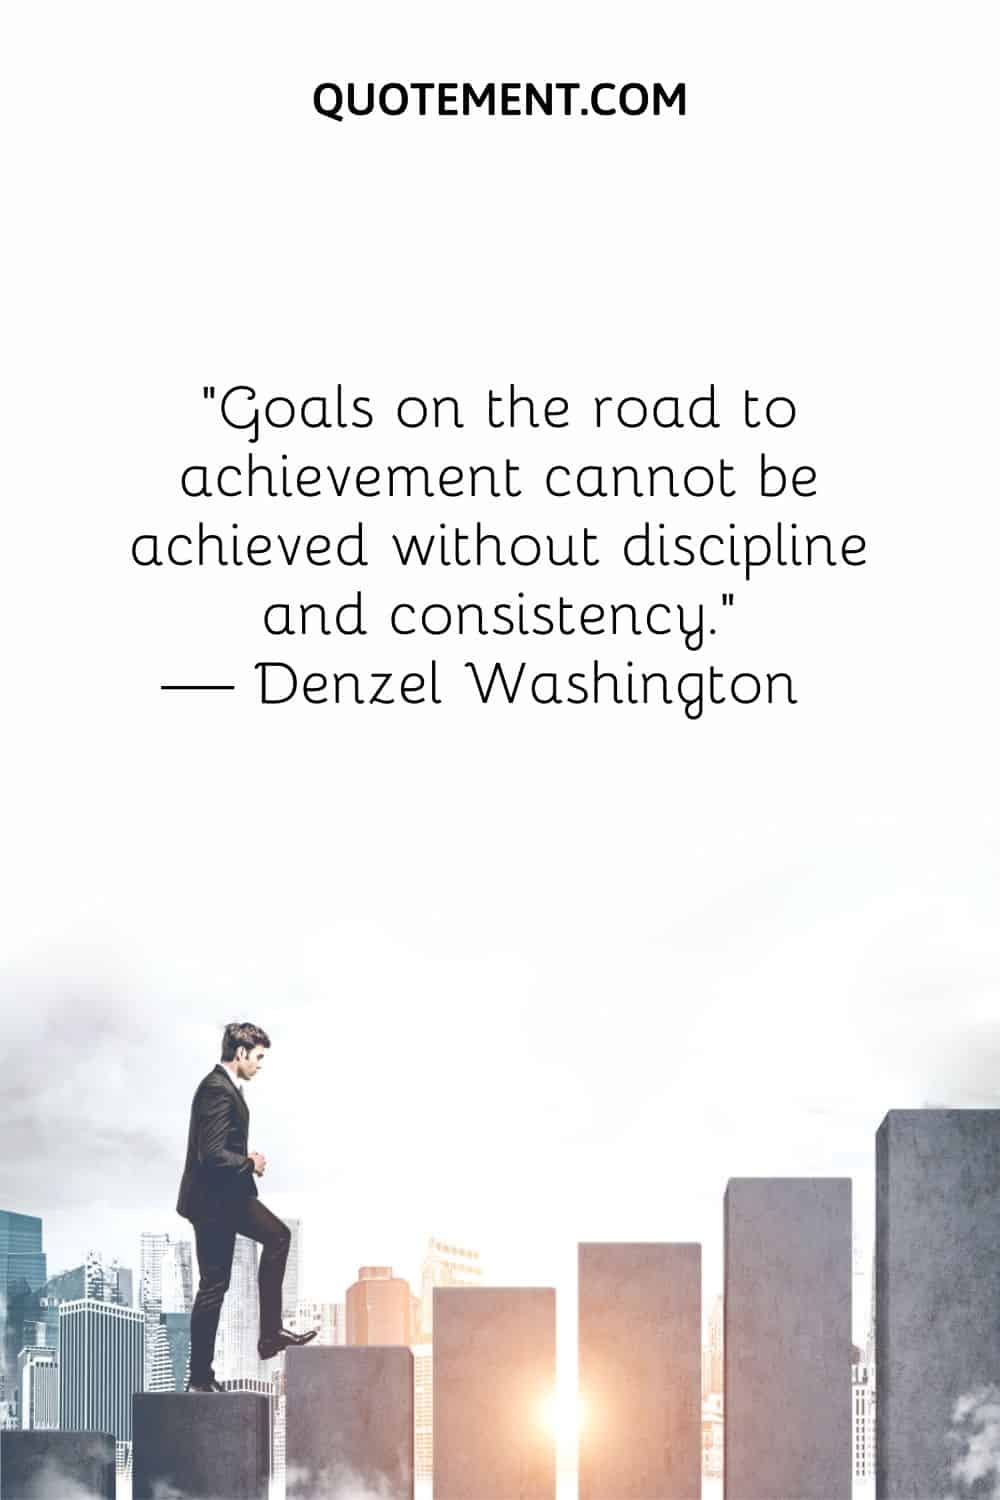 Goals on the road to achievement cannot be achieved without discipline and consistency